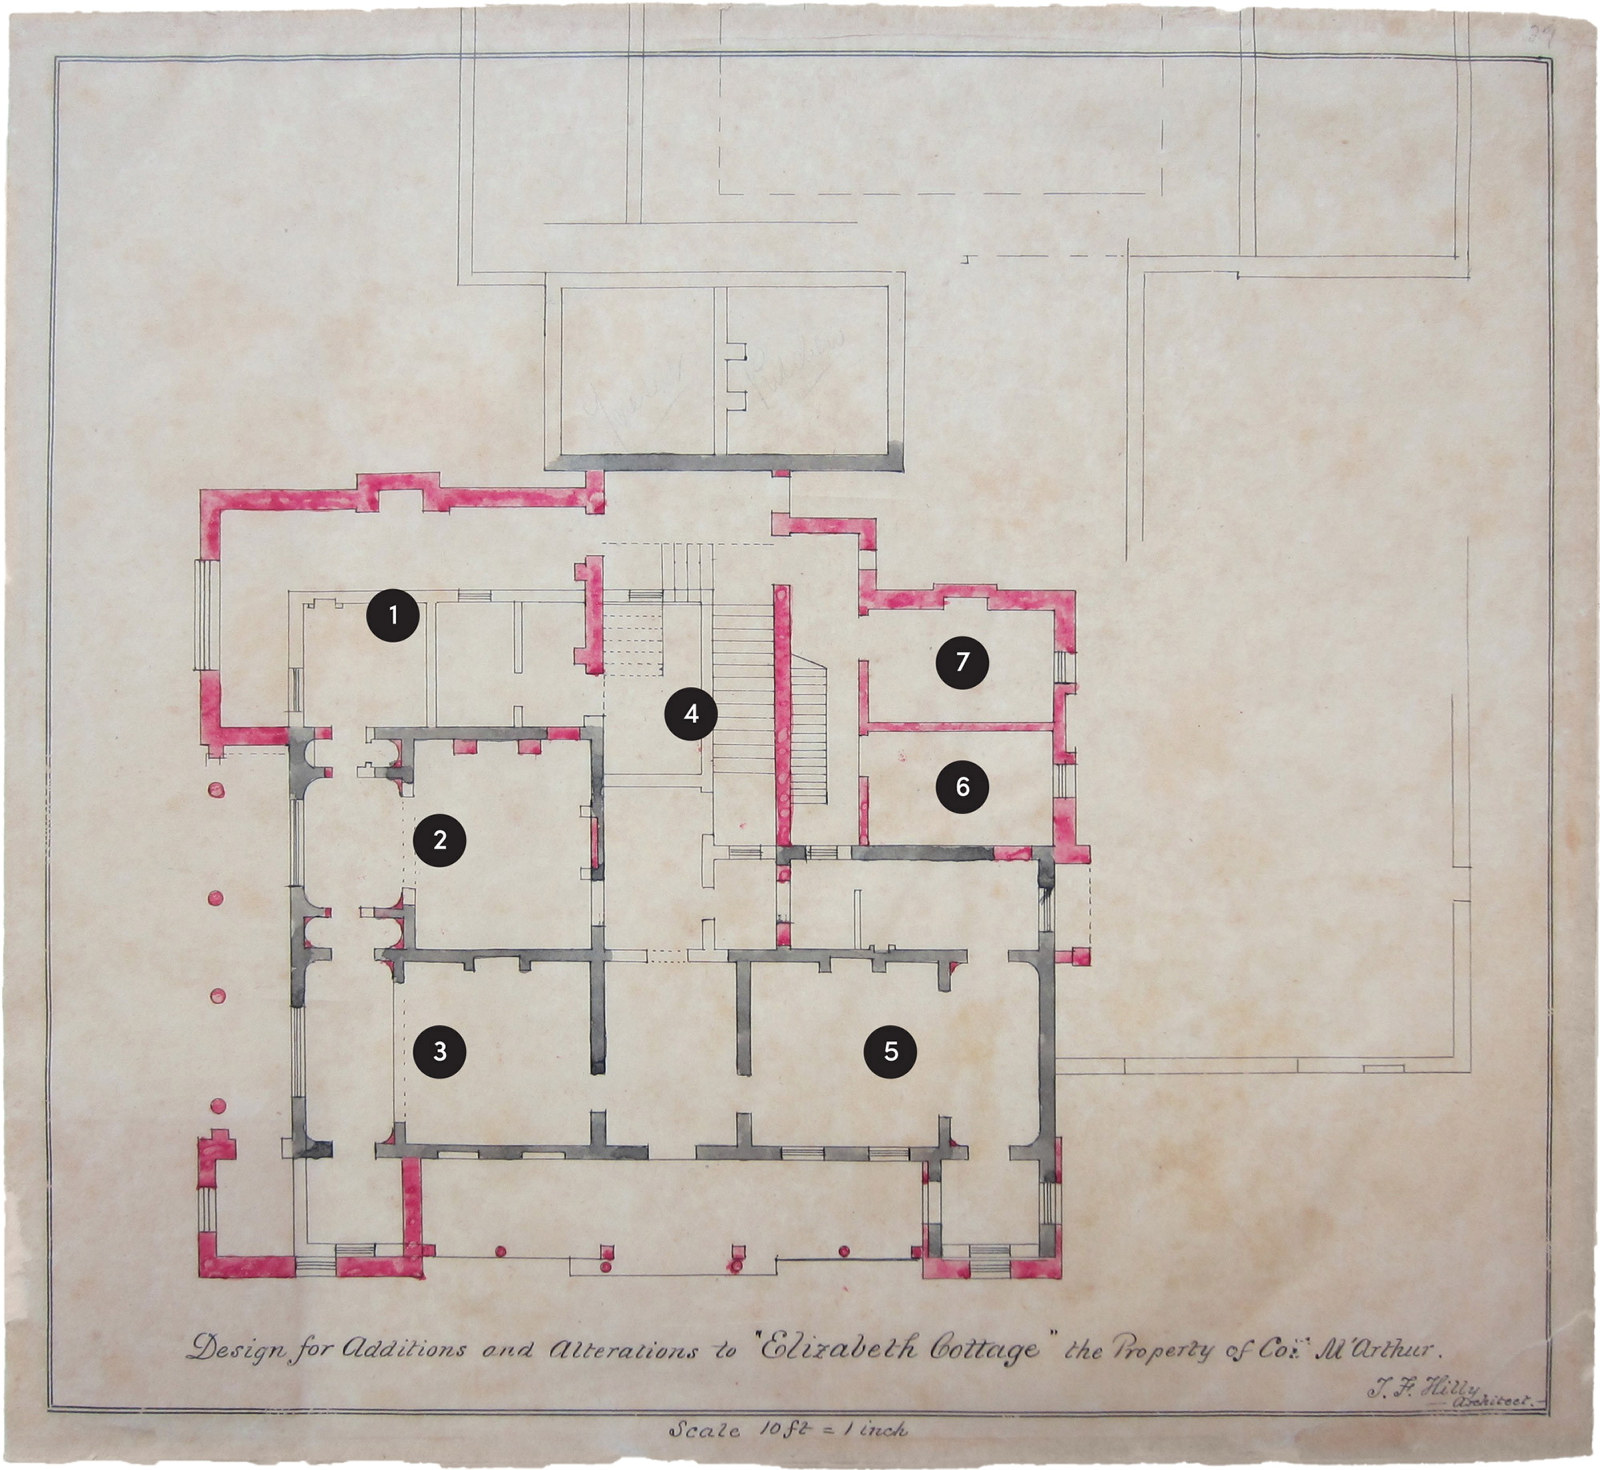 Design-for-additions-and-alterations-to-Elizabeth-Cottage_J-F-Hilly_plan-1-ground-floor-overlaid-on-original_numbered-black.jpg